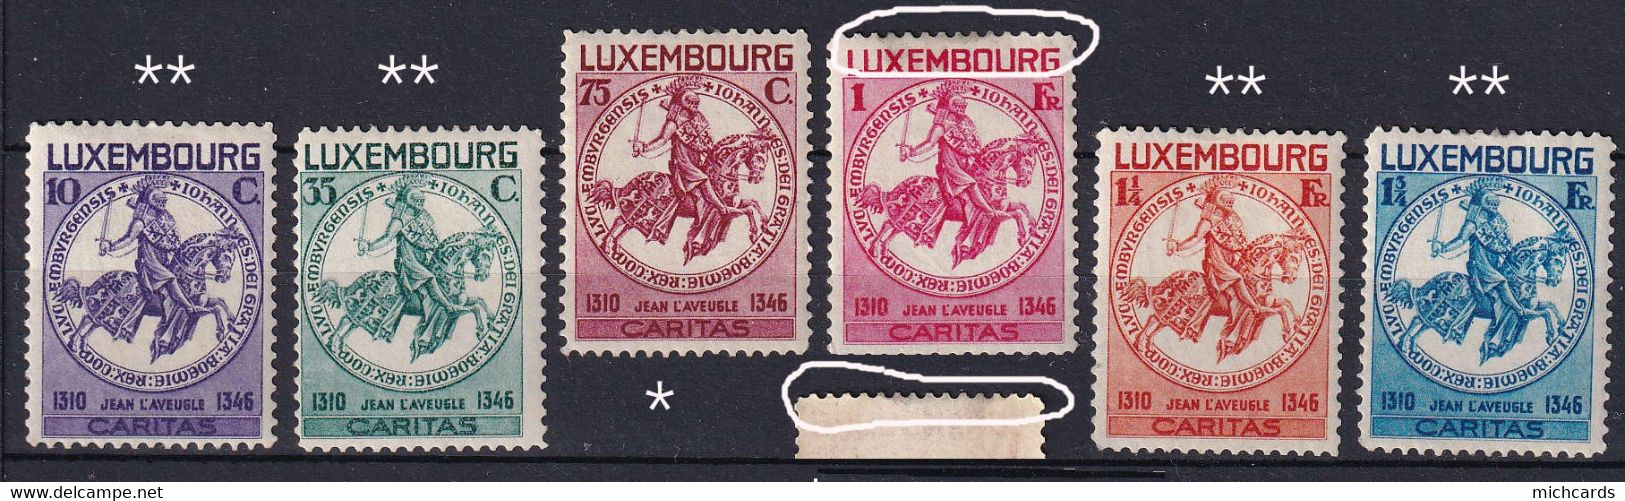 245 LUXEMBOURG 1934 - Y&T 252/53 Et 256/57 Neuf ** MNH - 254/55 Neuf * MLH - Caritas Cheval - 1926-39 Charlotte Rechterzijde